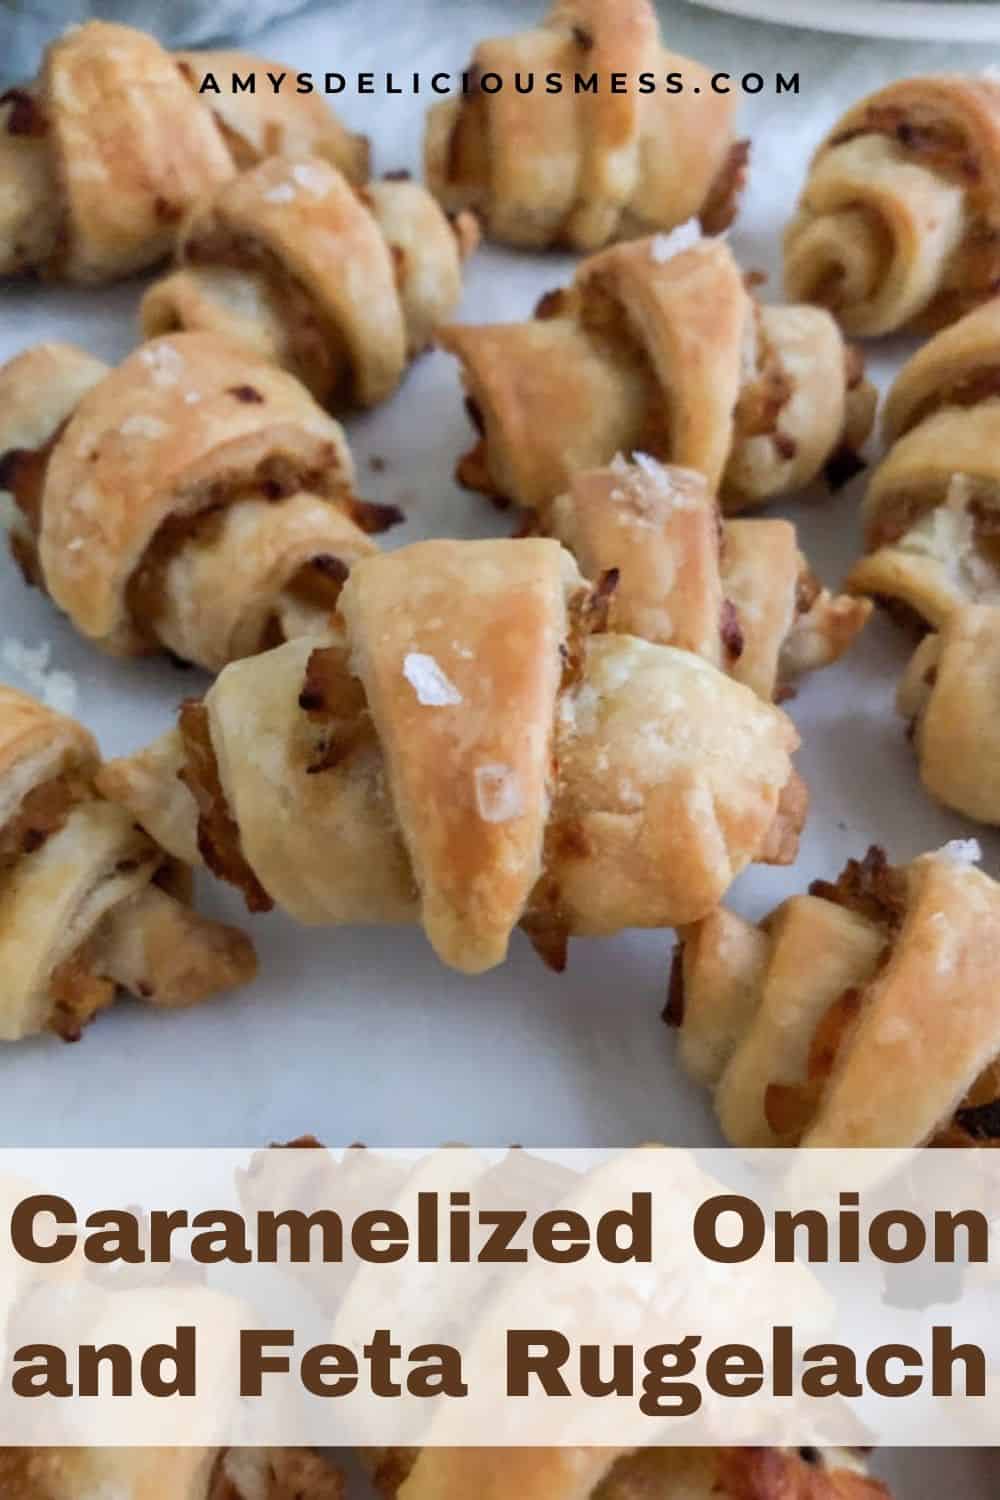 Baked rugelach arranged on top and next to each other on parchment paper.